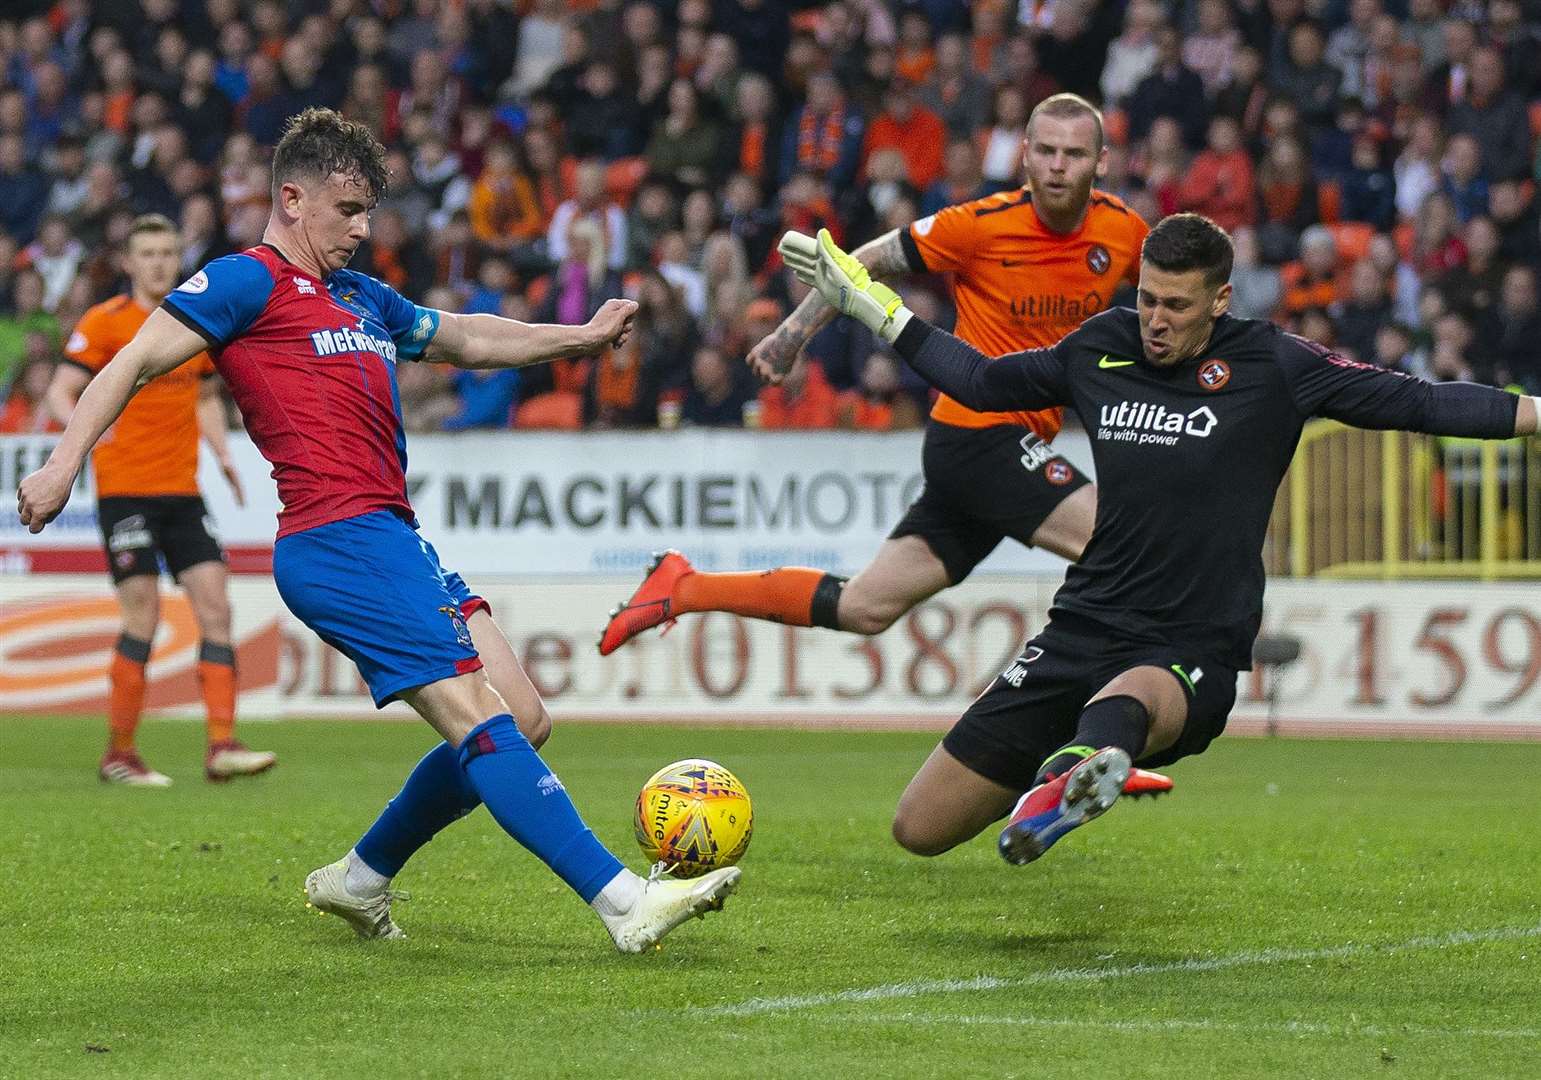 Inverness Caledonian Thistle's season was ended in the play-offs against Dundee United. Picture: Ken Macpherson